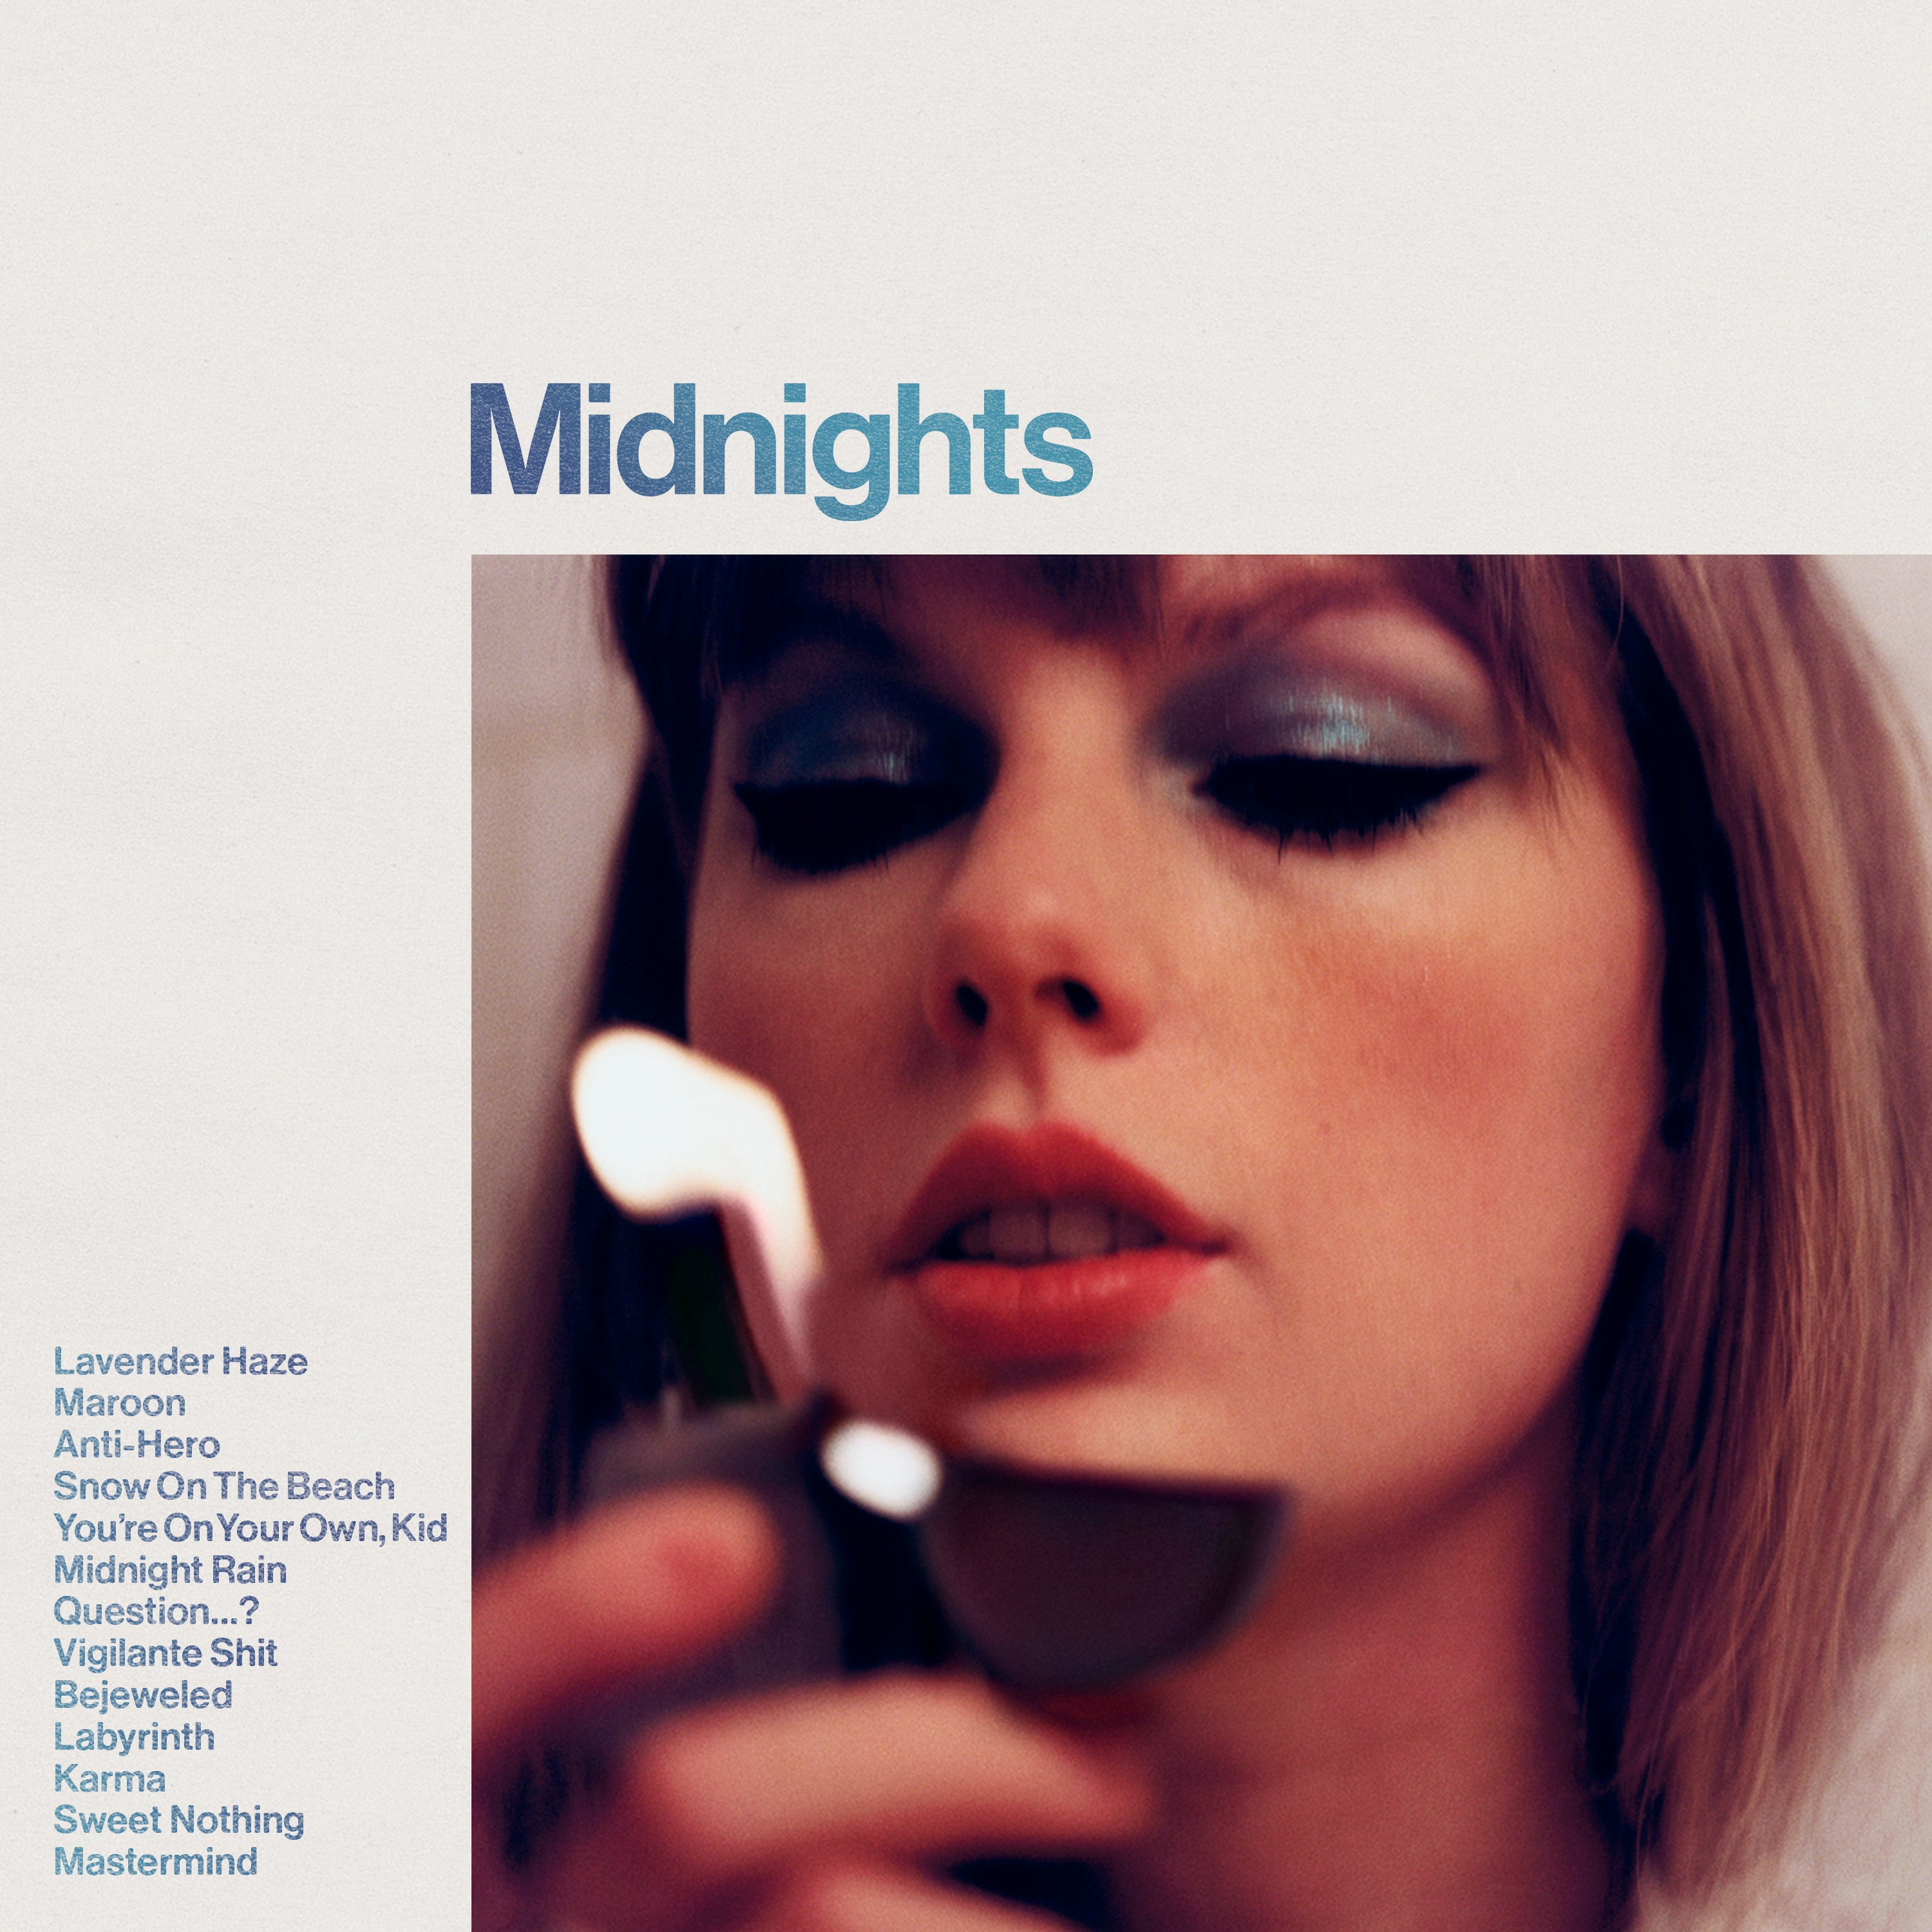 Taylor Swift in album artwork for her record, ‘Midnights’